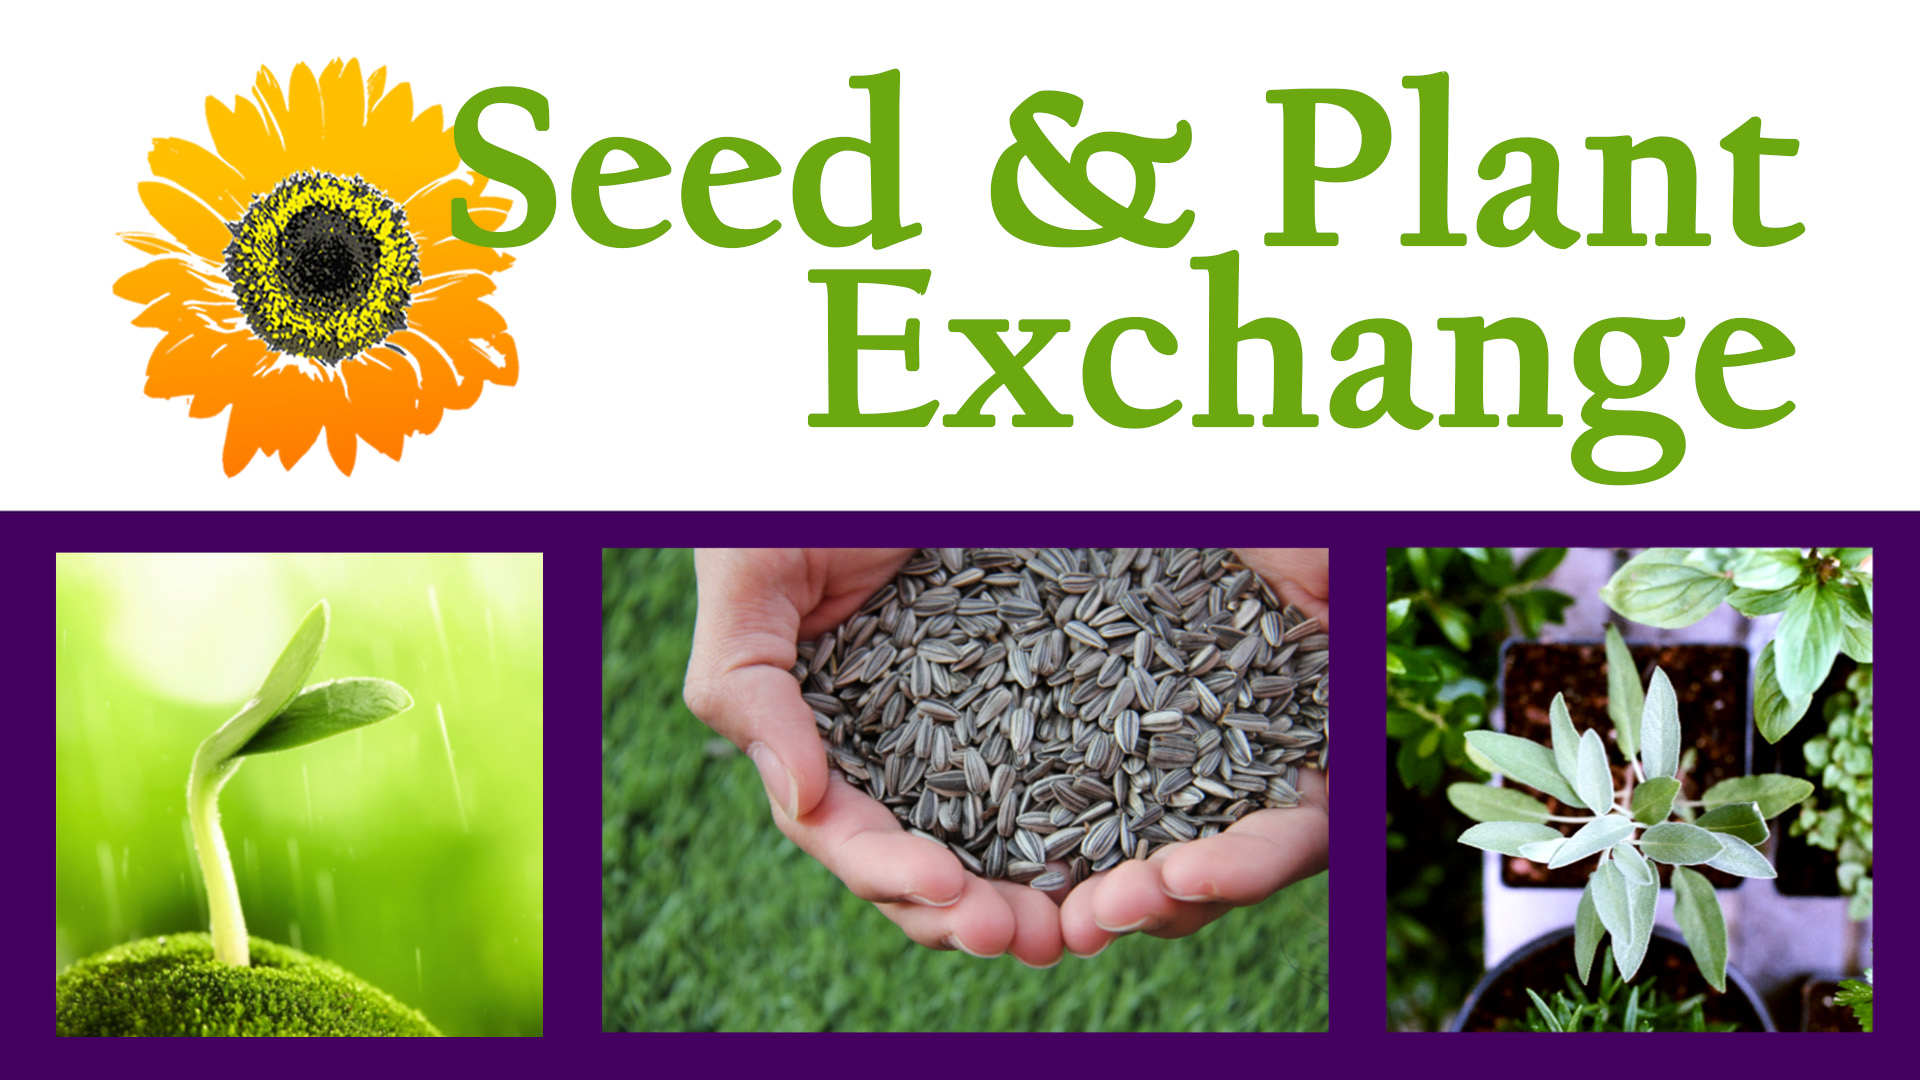 Image show an orange sunflower at the top with the words "Seed & Plant Exhange" in elegant green font. The bottom half of the image shows a trio of images in a deep purple background: a bright green seed sprout glistening in the sun, many seeds cupped in two hands, and several small potted plants.